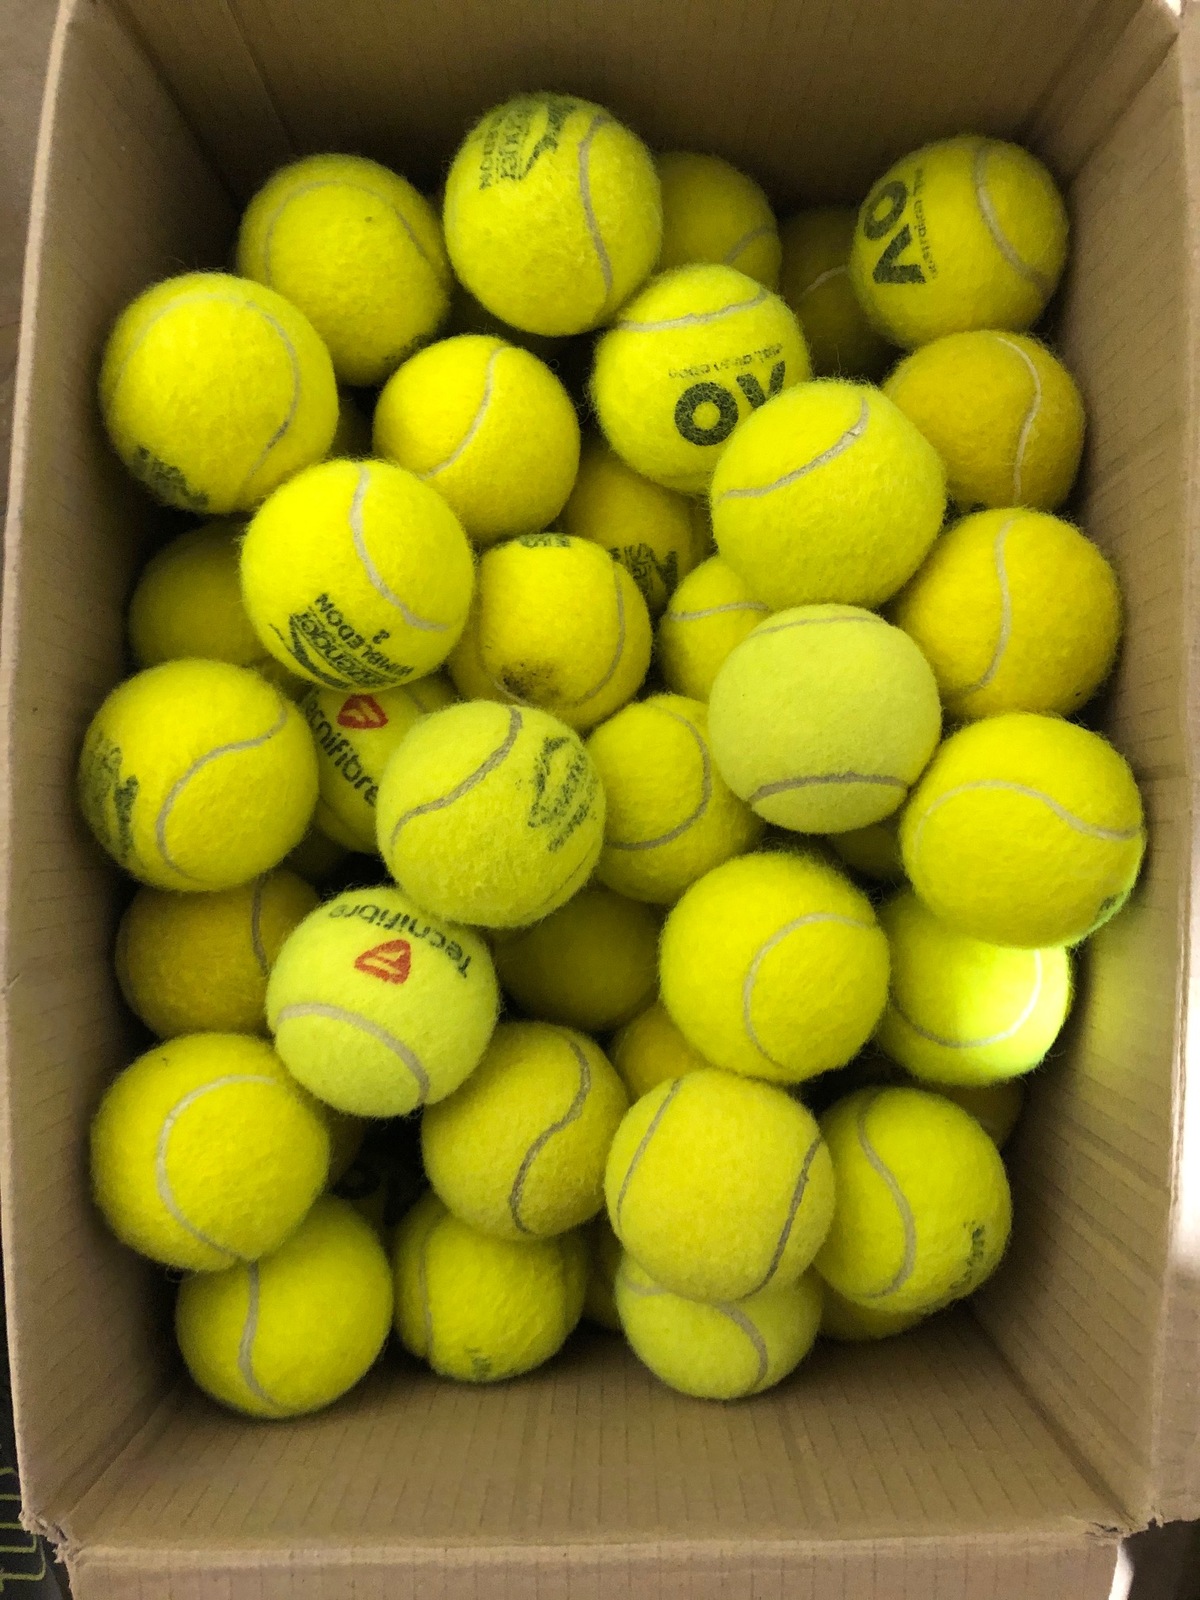 15 or 30 Used Tennis Balls For Dogs Sanitised Branded Balls Good Condition 